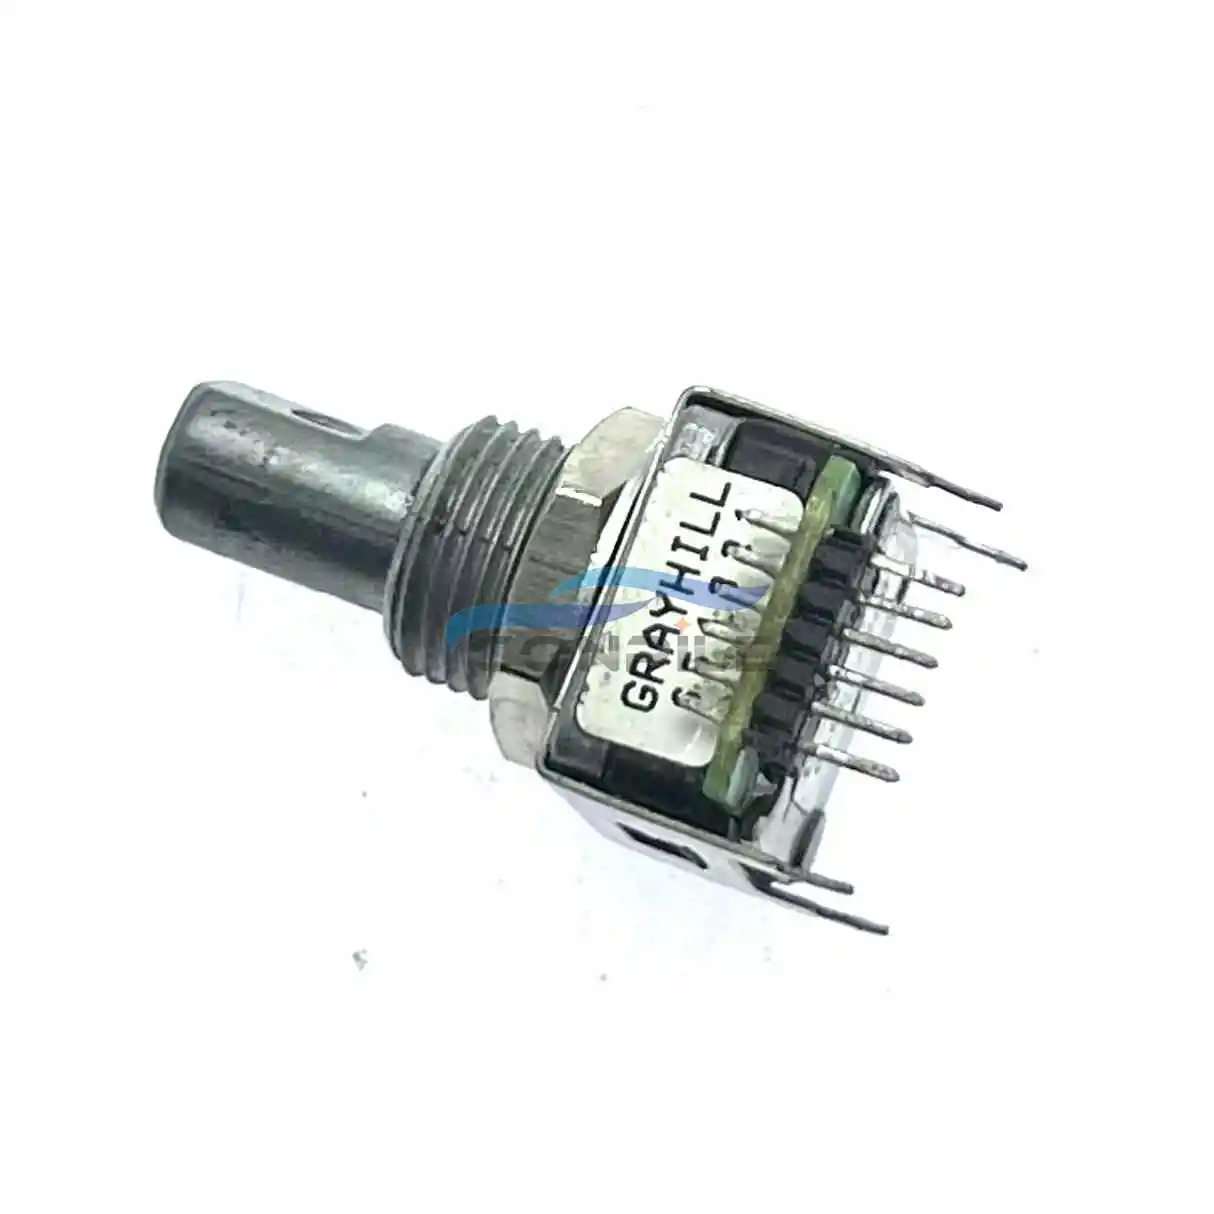 1pc for GRAYHILL Photoelectric Encoder Push Switch 24 Positioning 62SY15019 Monitor Car Navigation